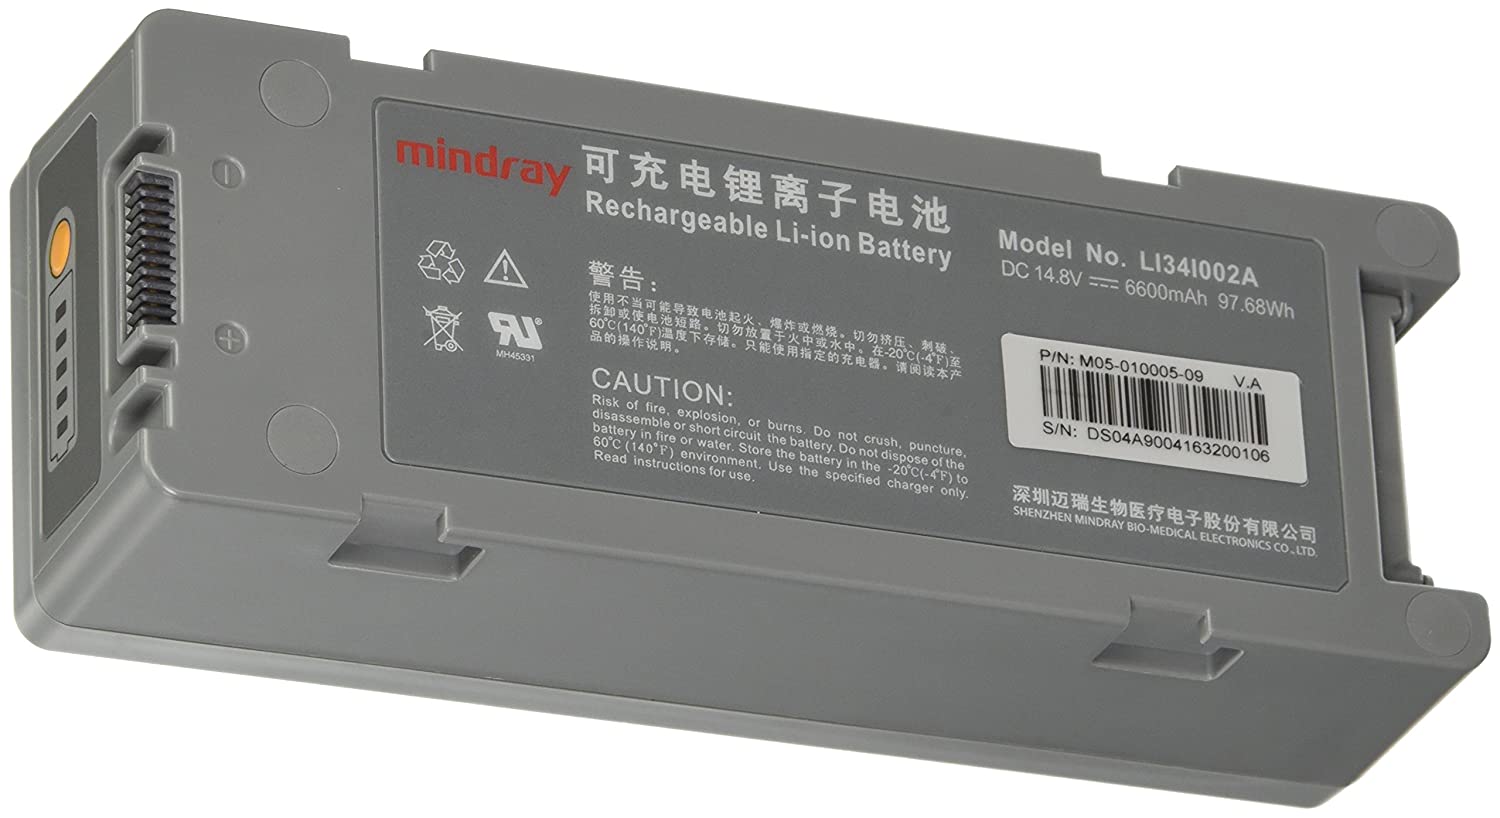 Original battery for Datascope Mindray monitor DP50 / Z6  Type M05-010005-09